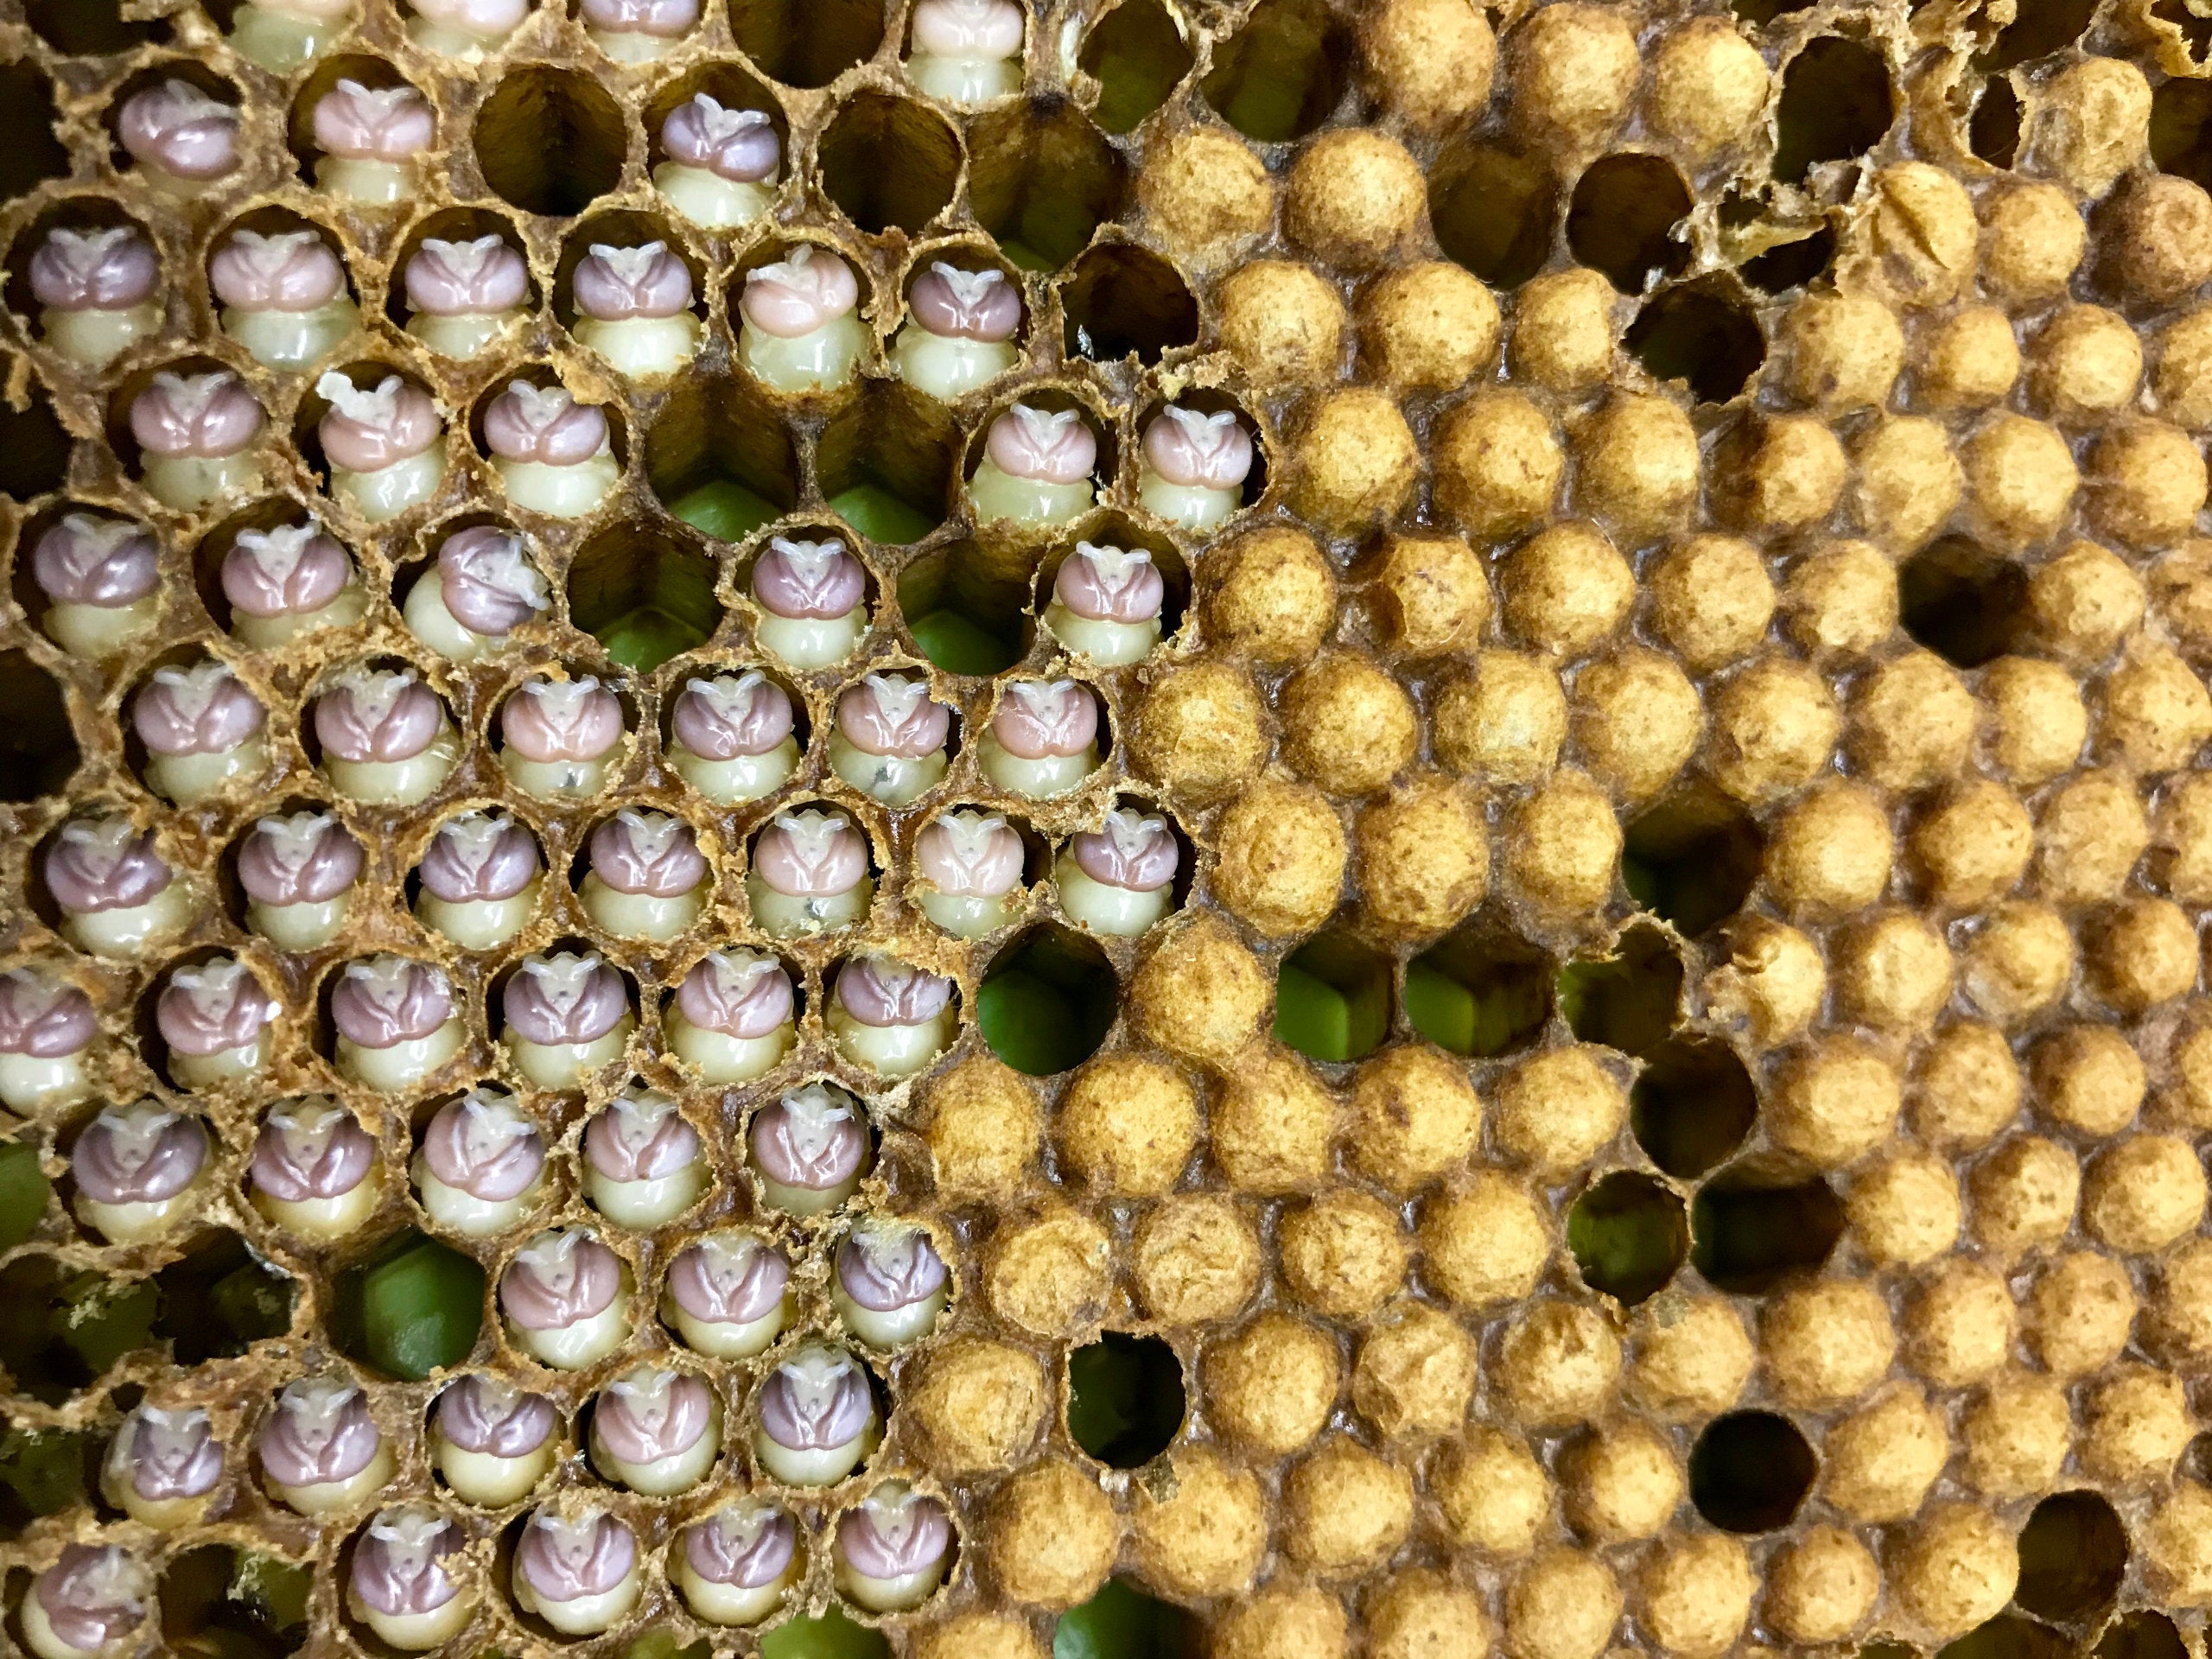 Honeybee drone pupae uncapped in the hive.